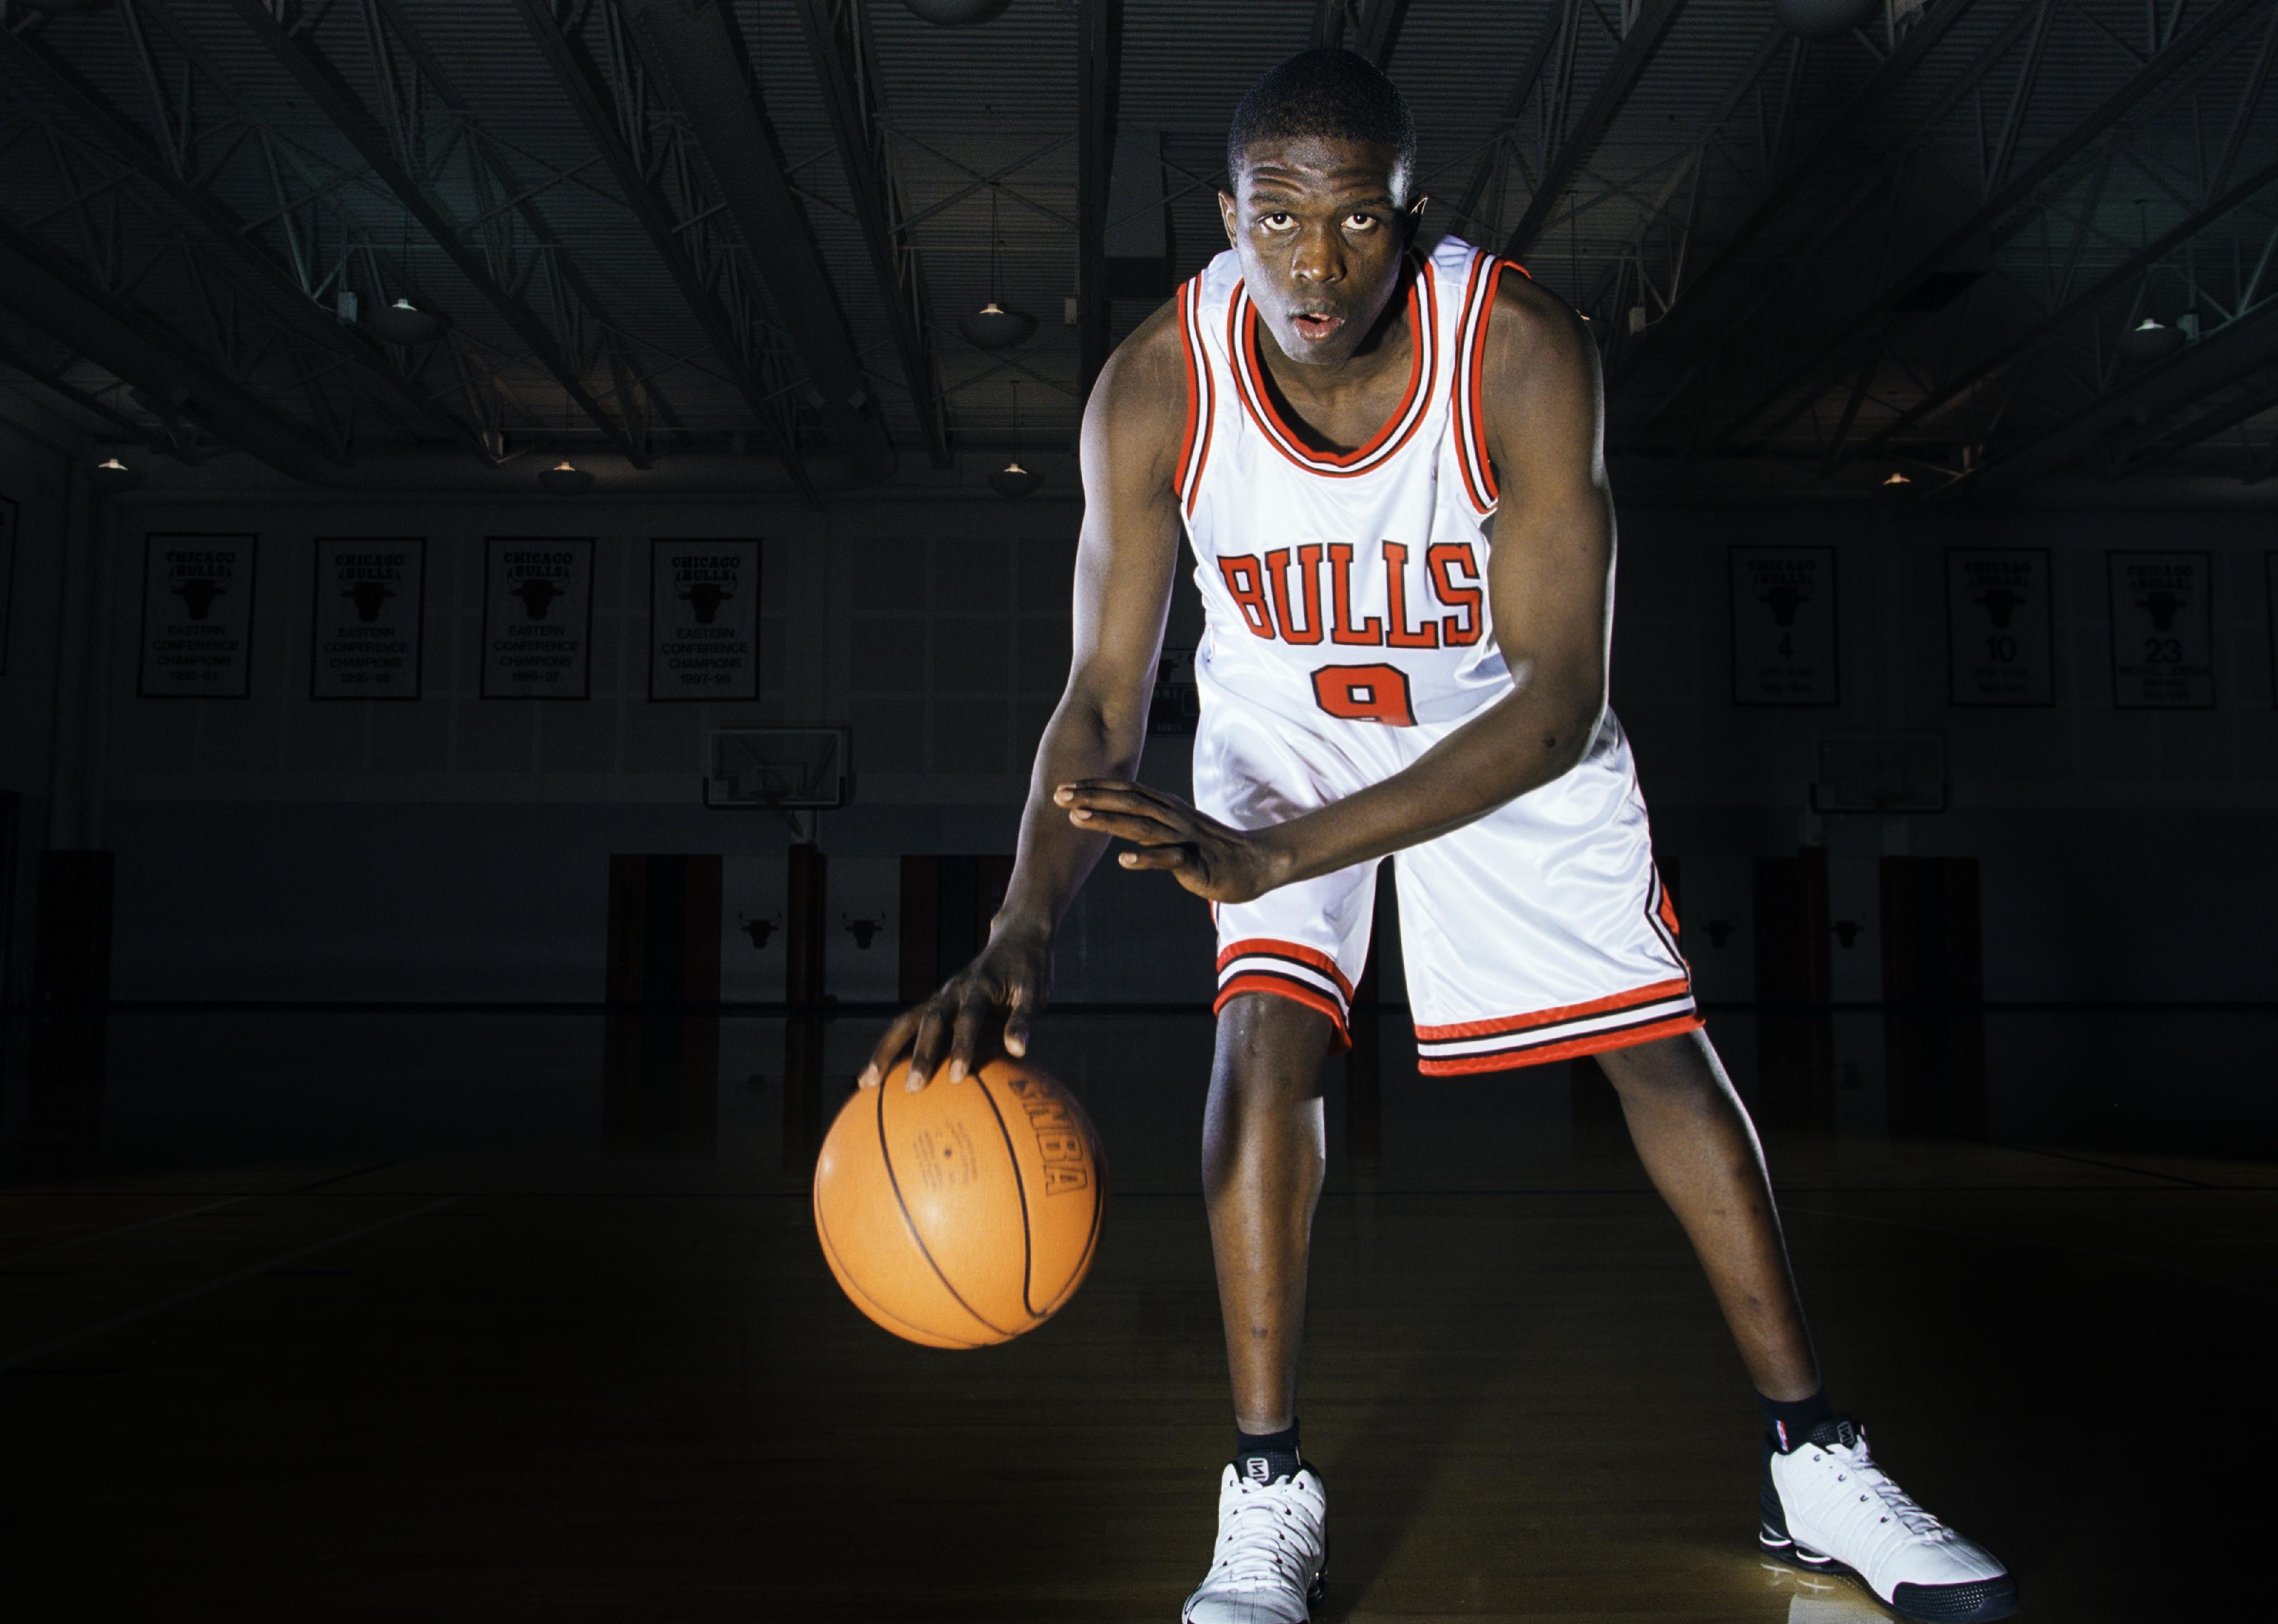 Luol Deng poses for a photo with the ball during his rookie photoshoot.